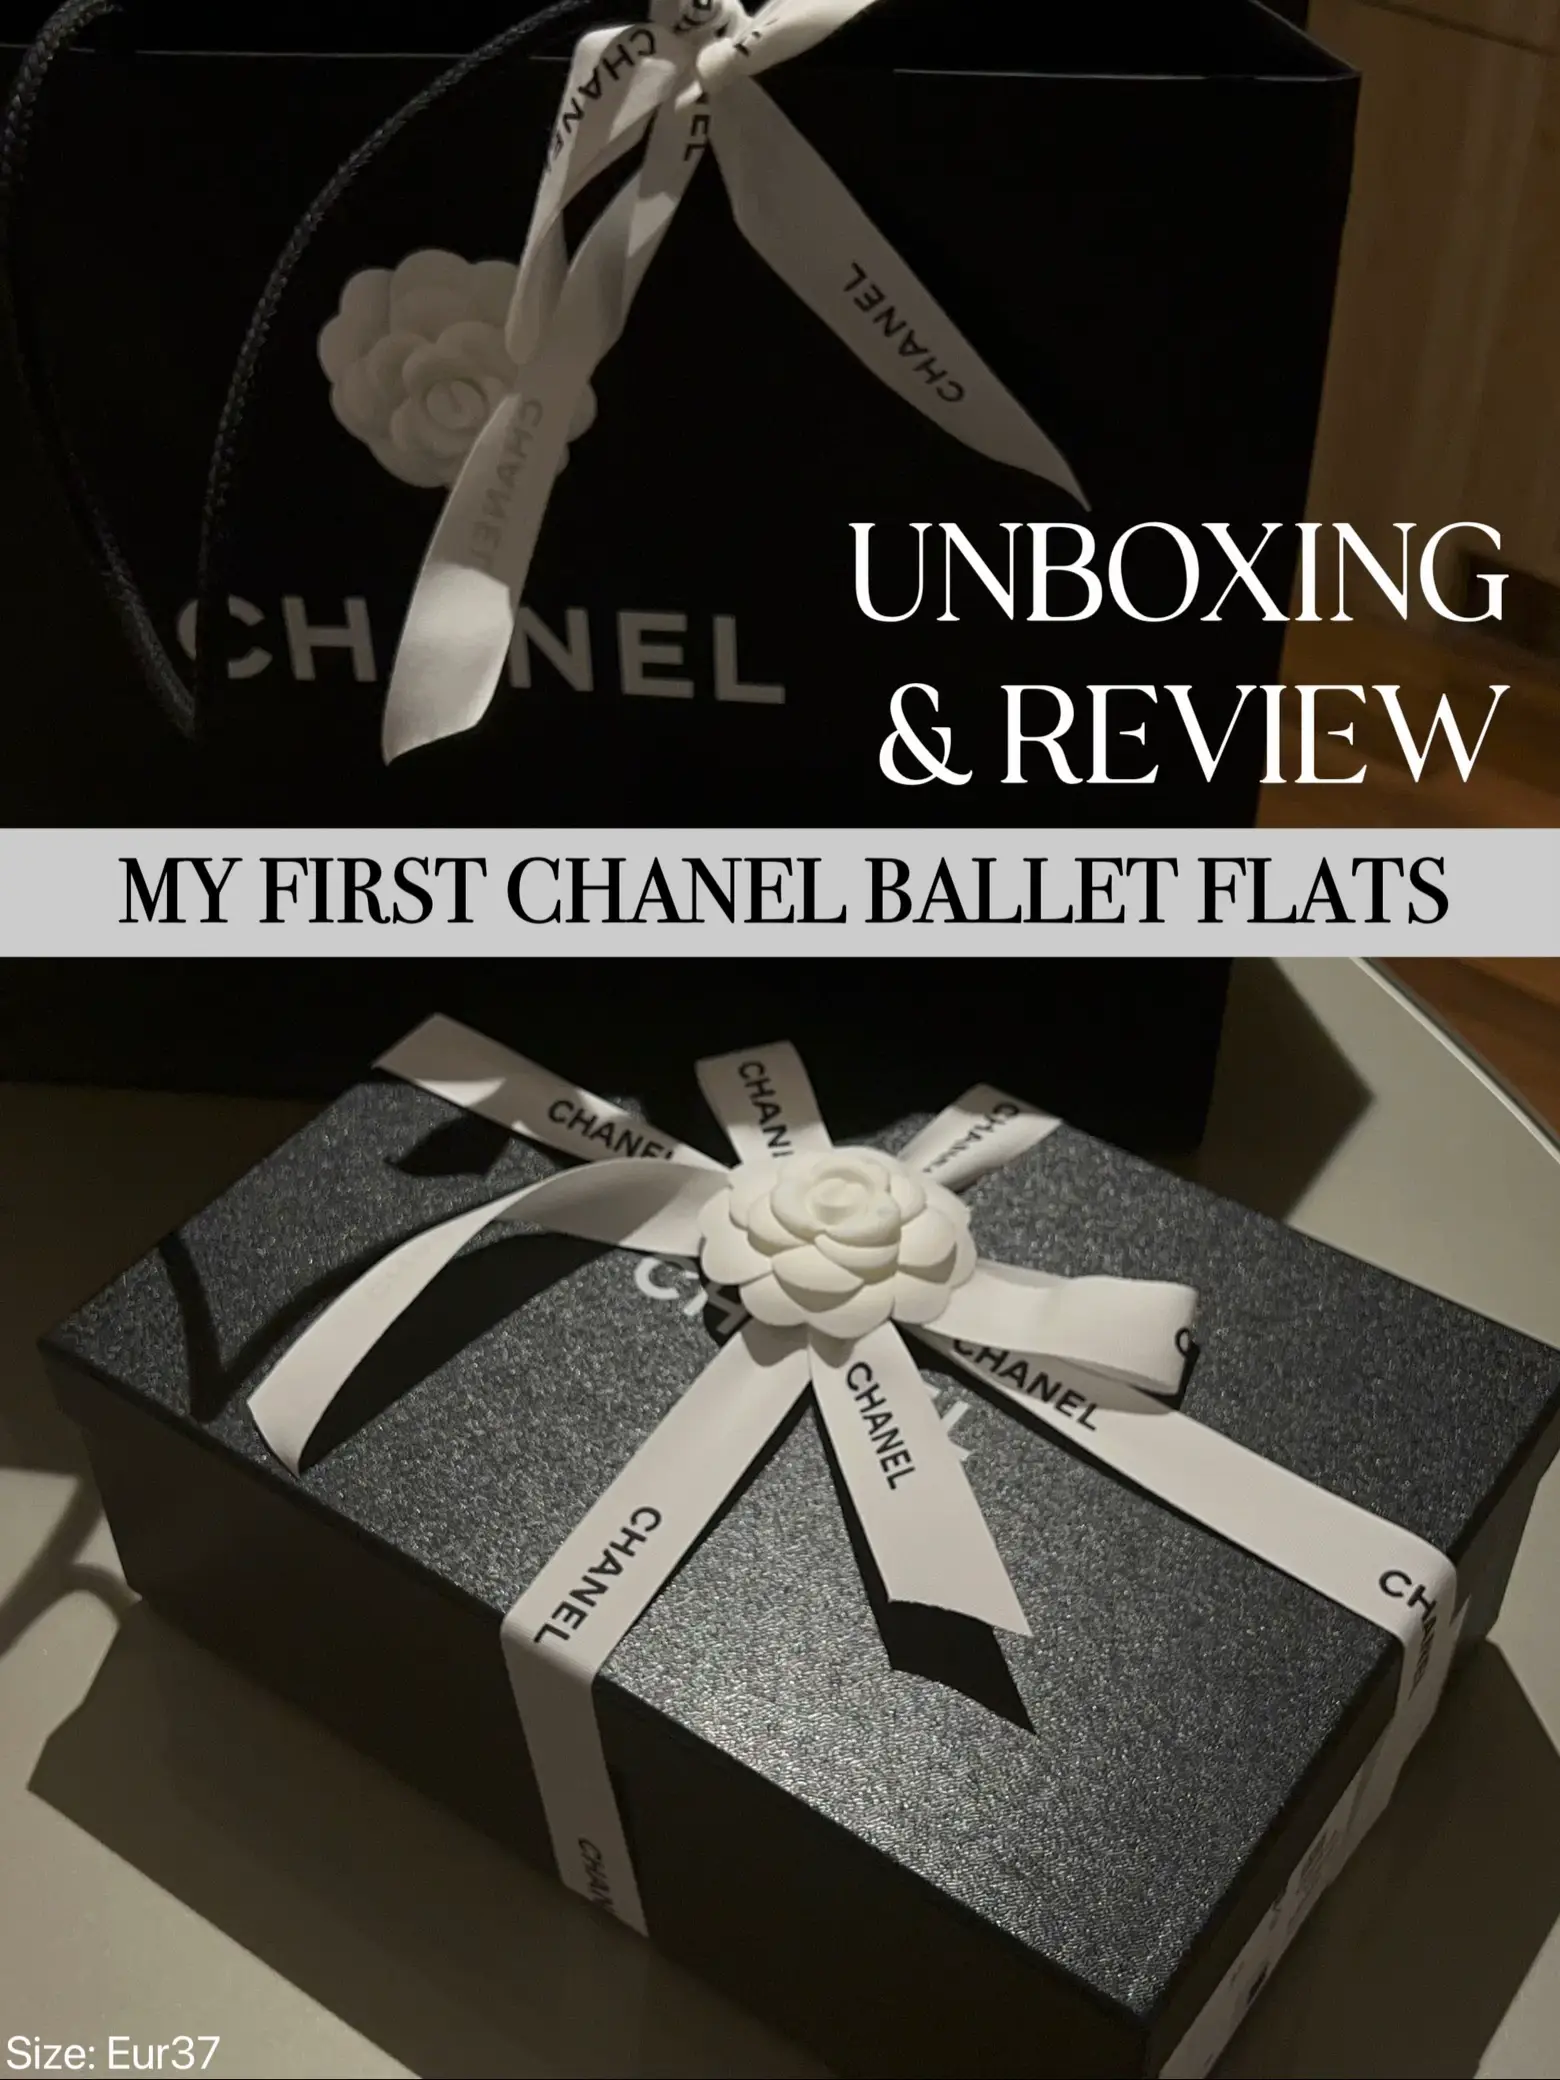 UNBOXING THE ICONIC CHANEL BALLET FLATS 🤍, Video published by Faznadia